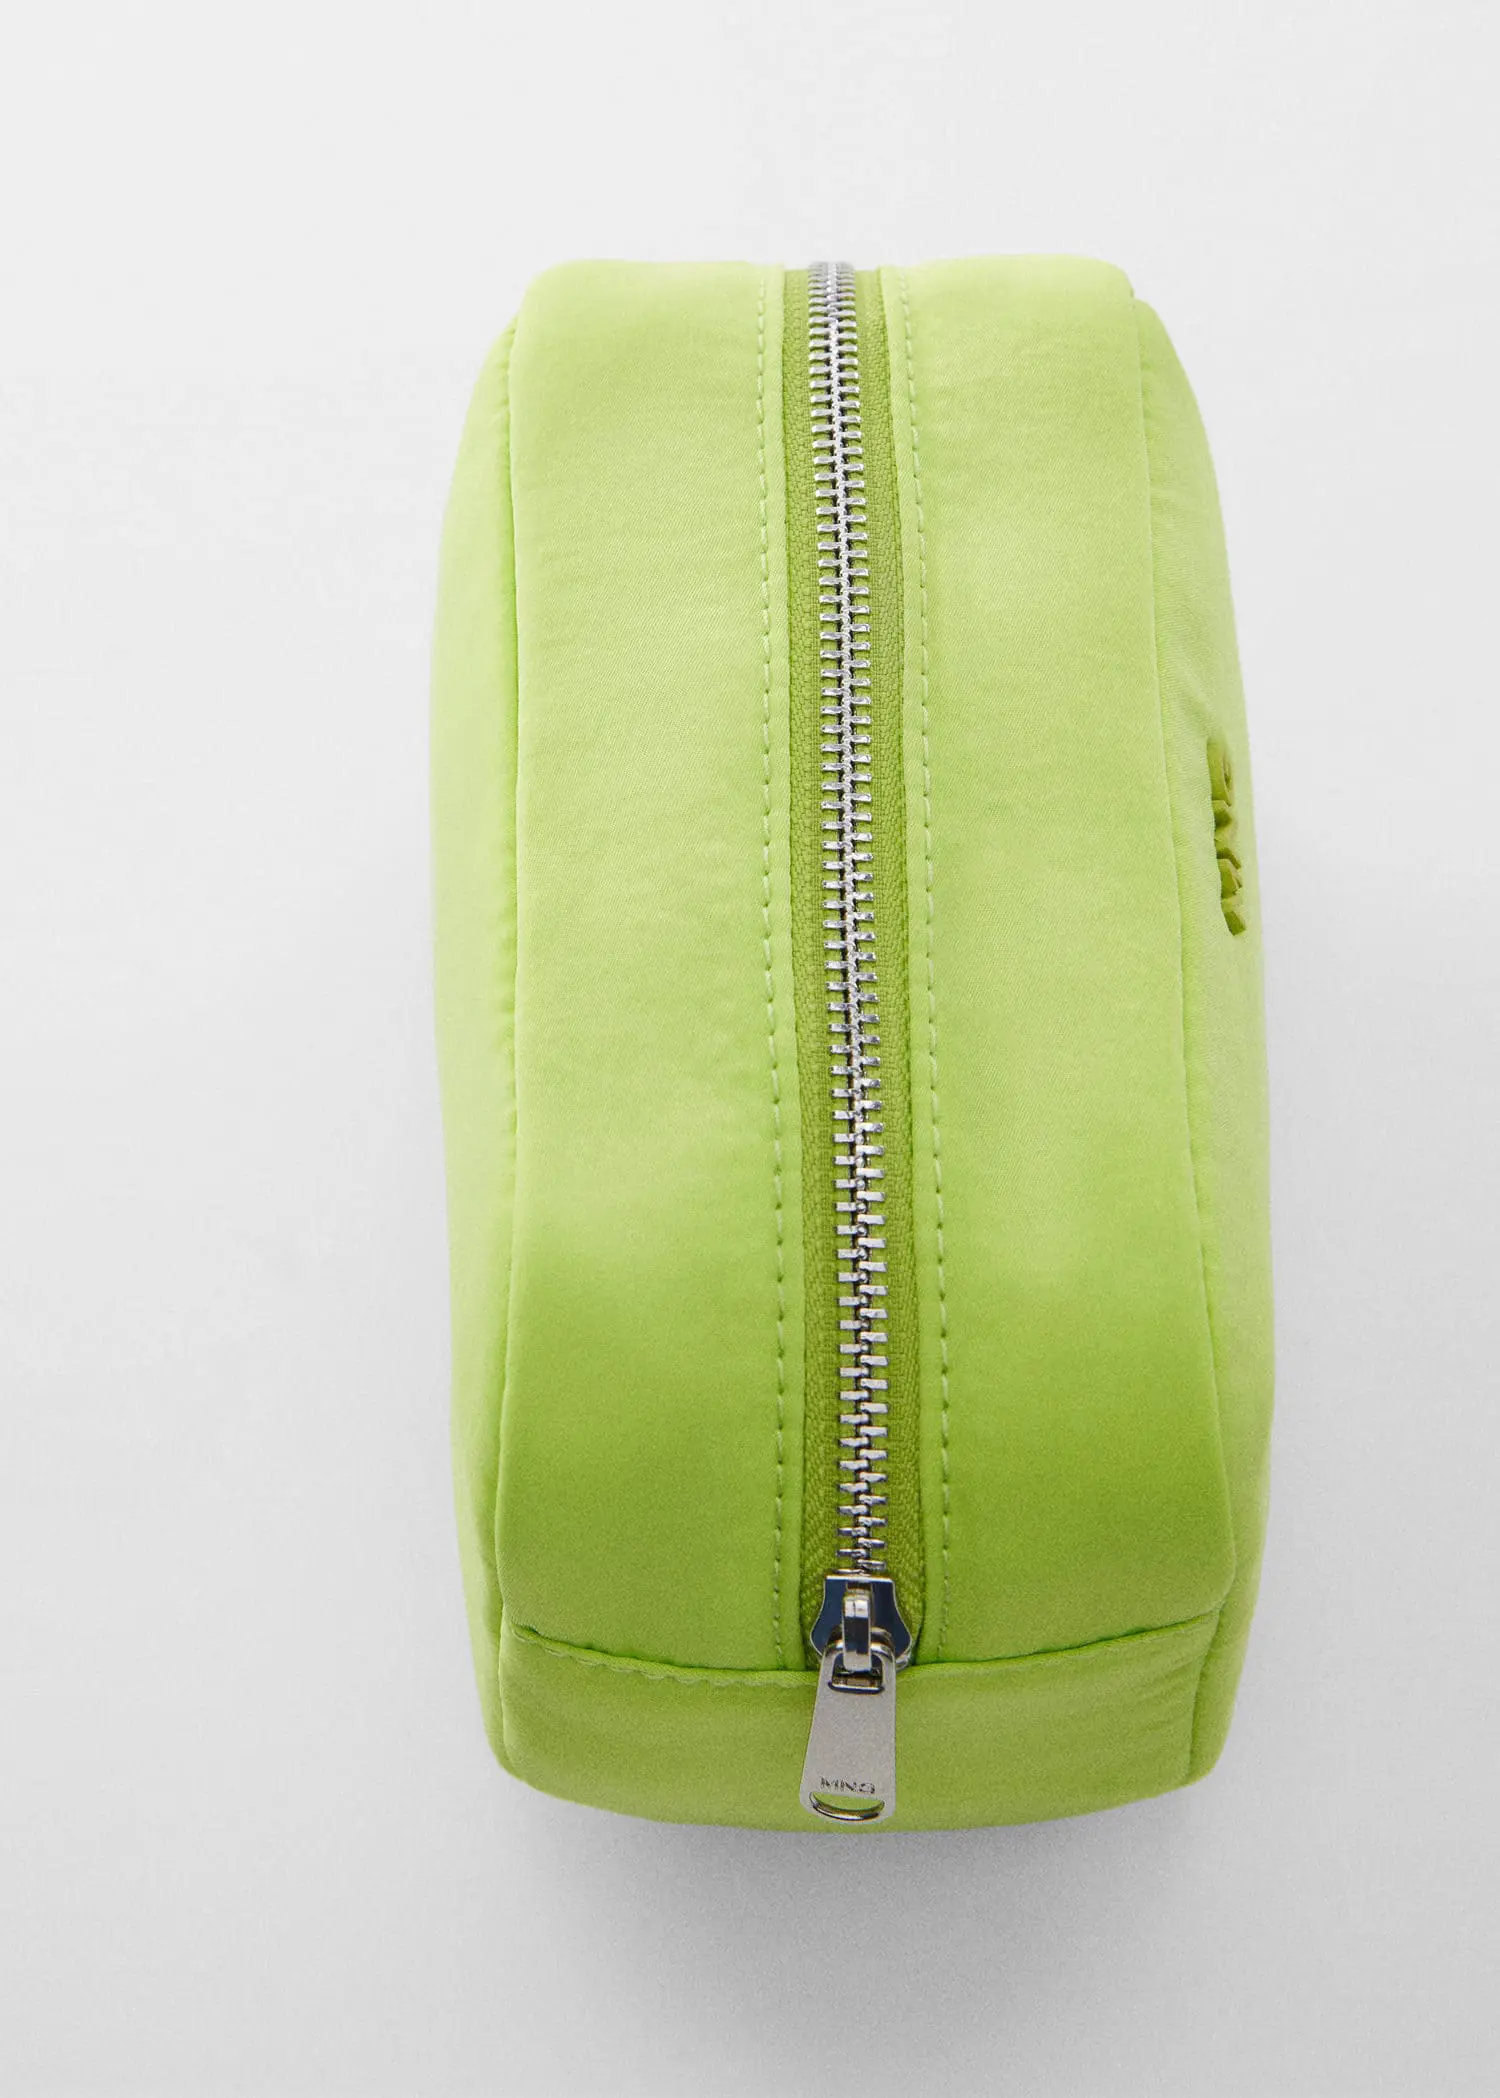 Mango Zippered toiletry bag with logo. a lime green bag with a silver zippered closure. 